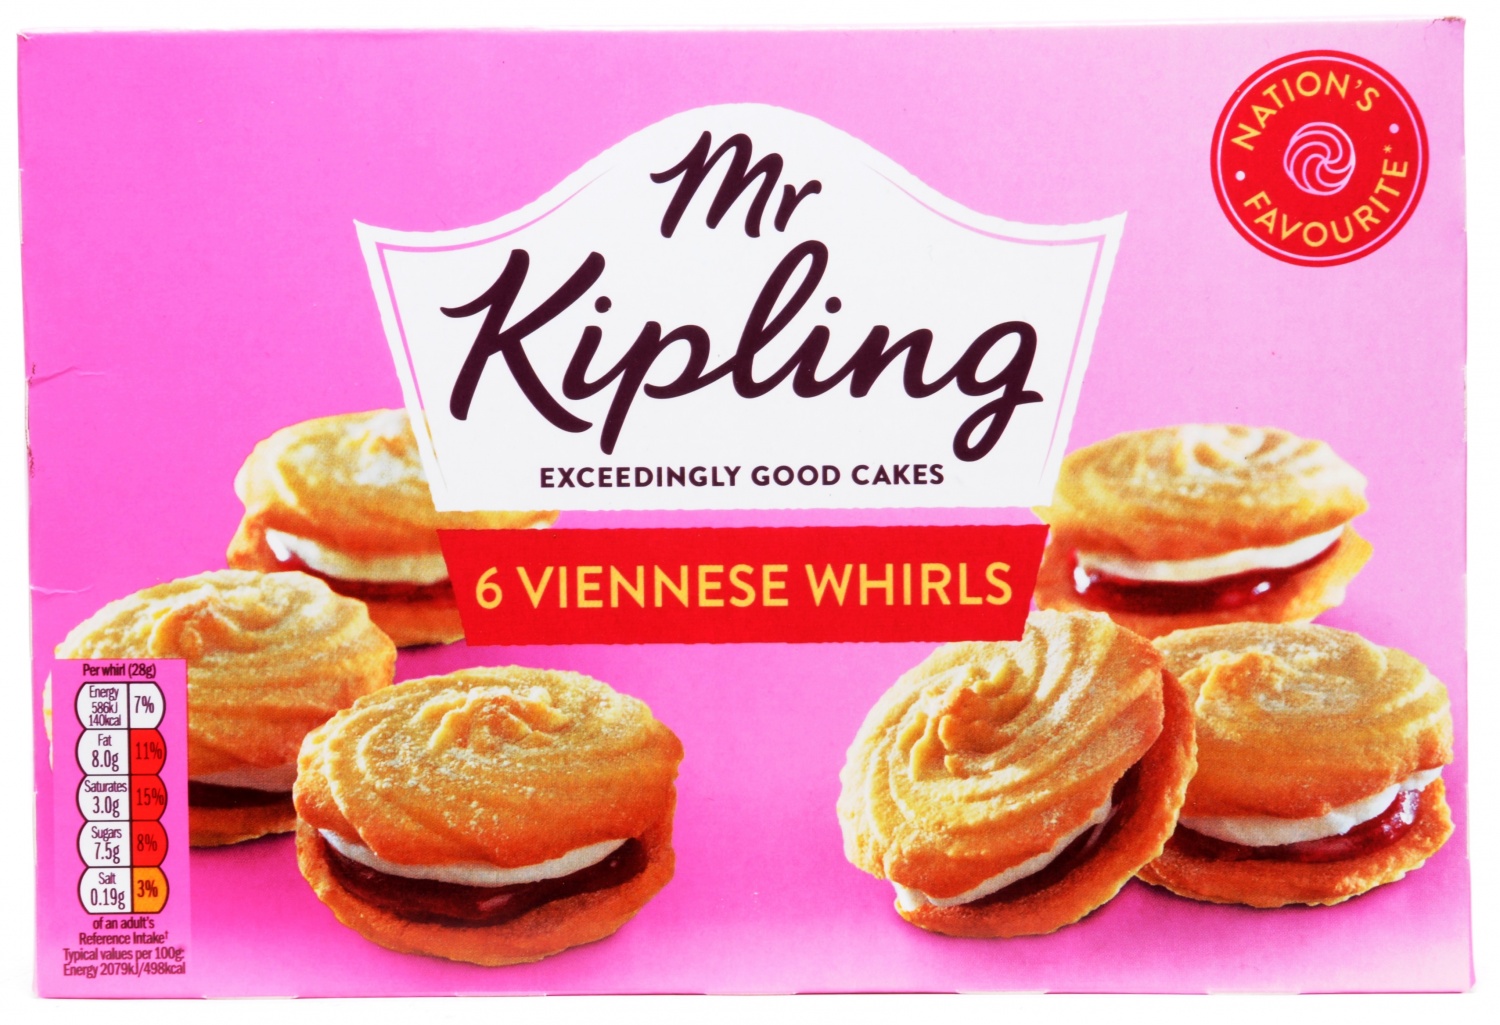 Mr Kipling 6 Viennese Whirls (Jan 24) RRP 1.79 CLEARANCE XL 0.89 each or 2 for 1.50